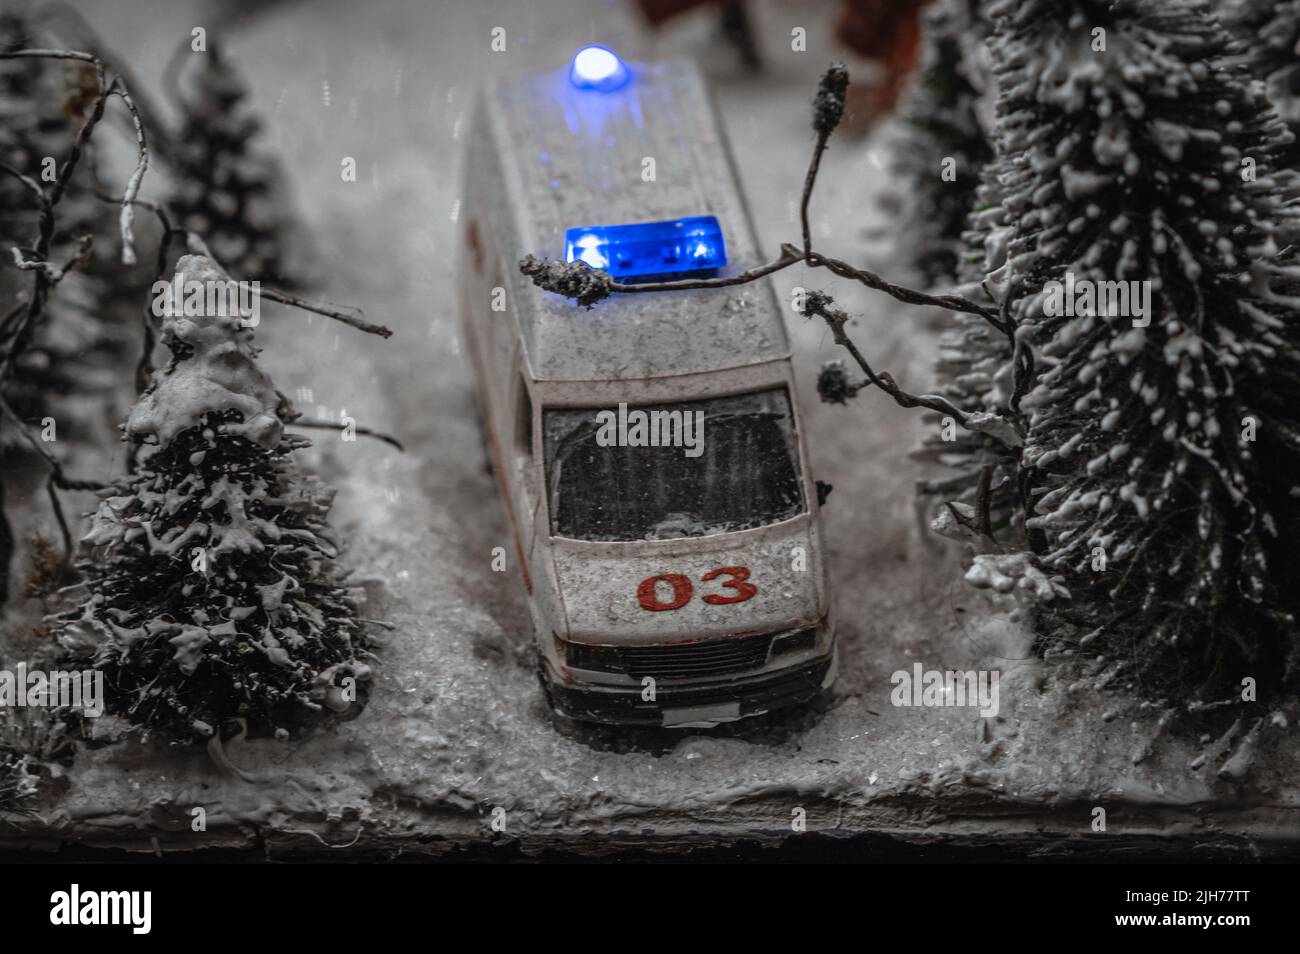 Toy representation of an ambulance vehicle stuck in snow amid the forest. Stock Photo